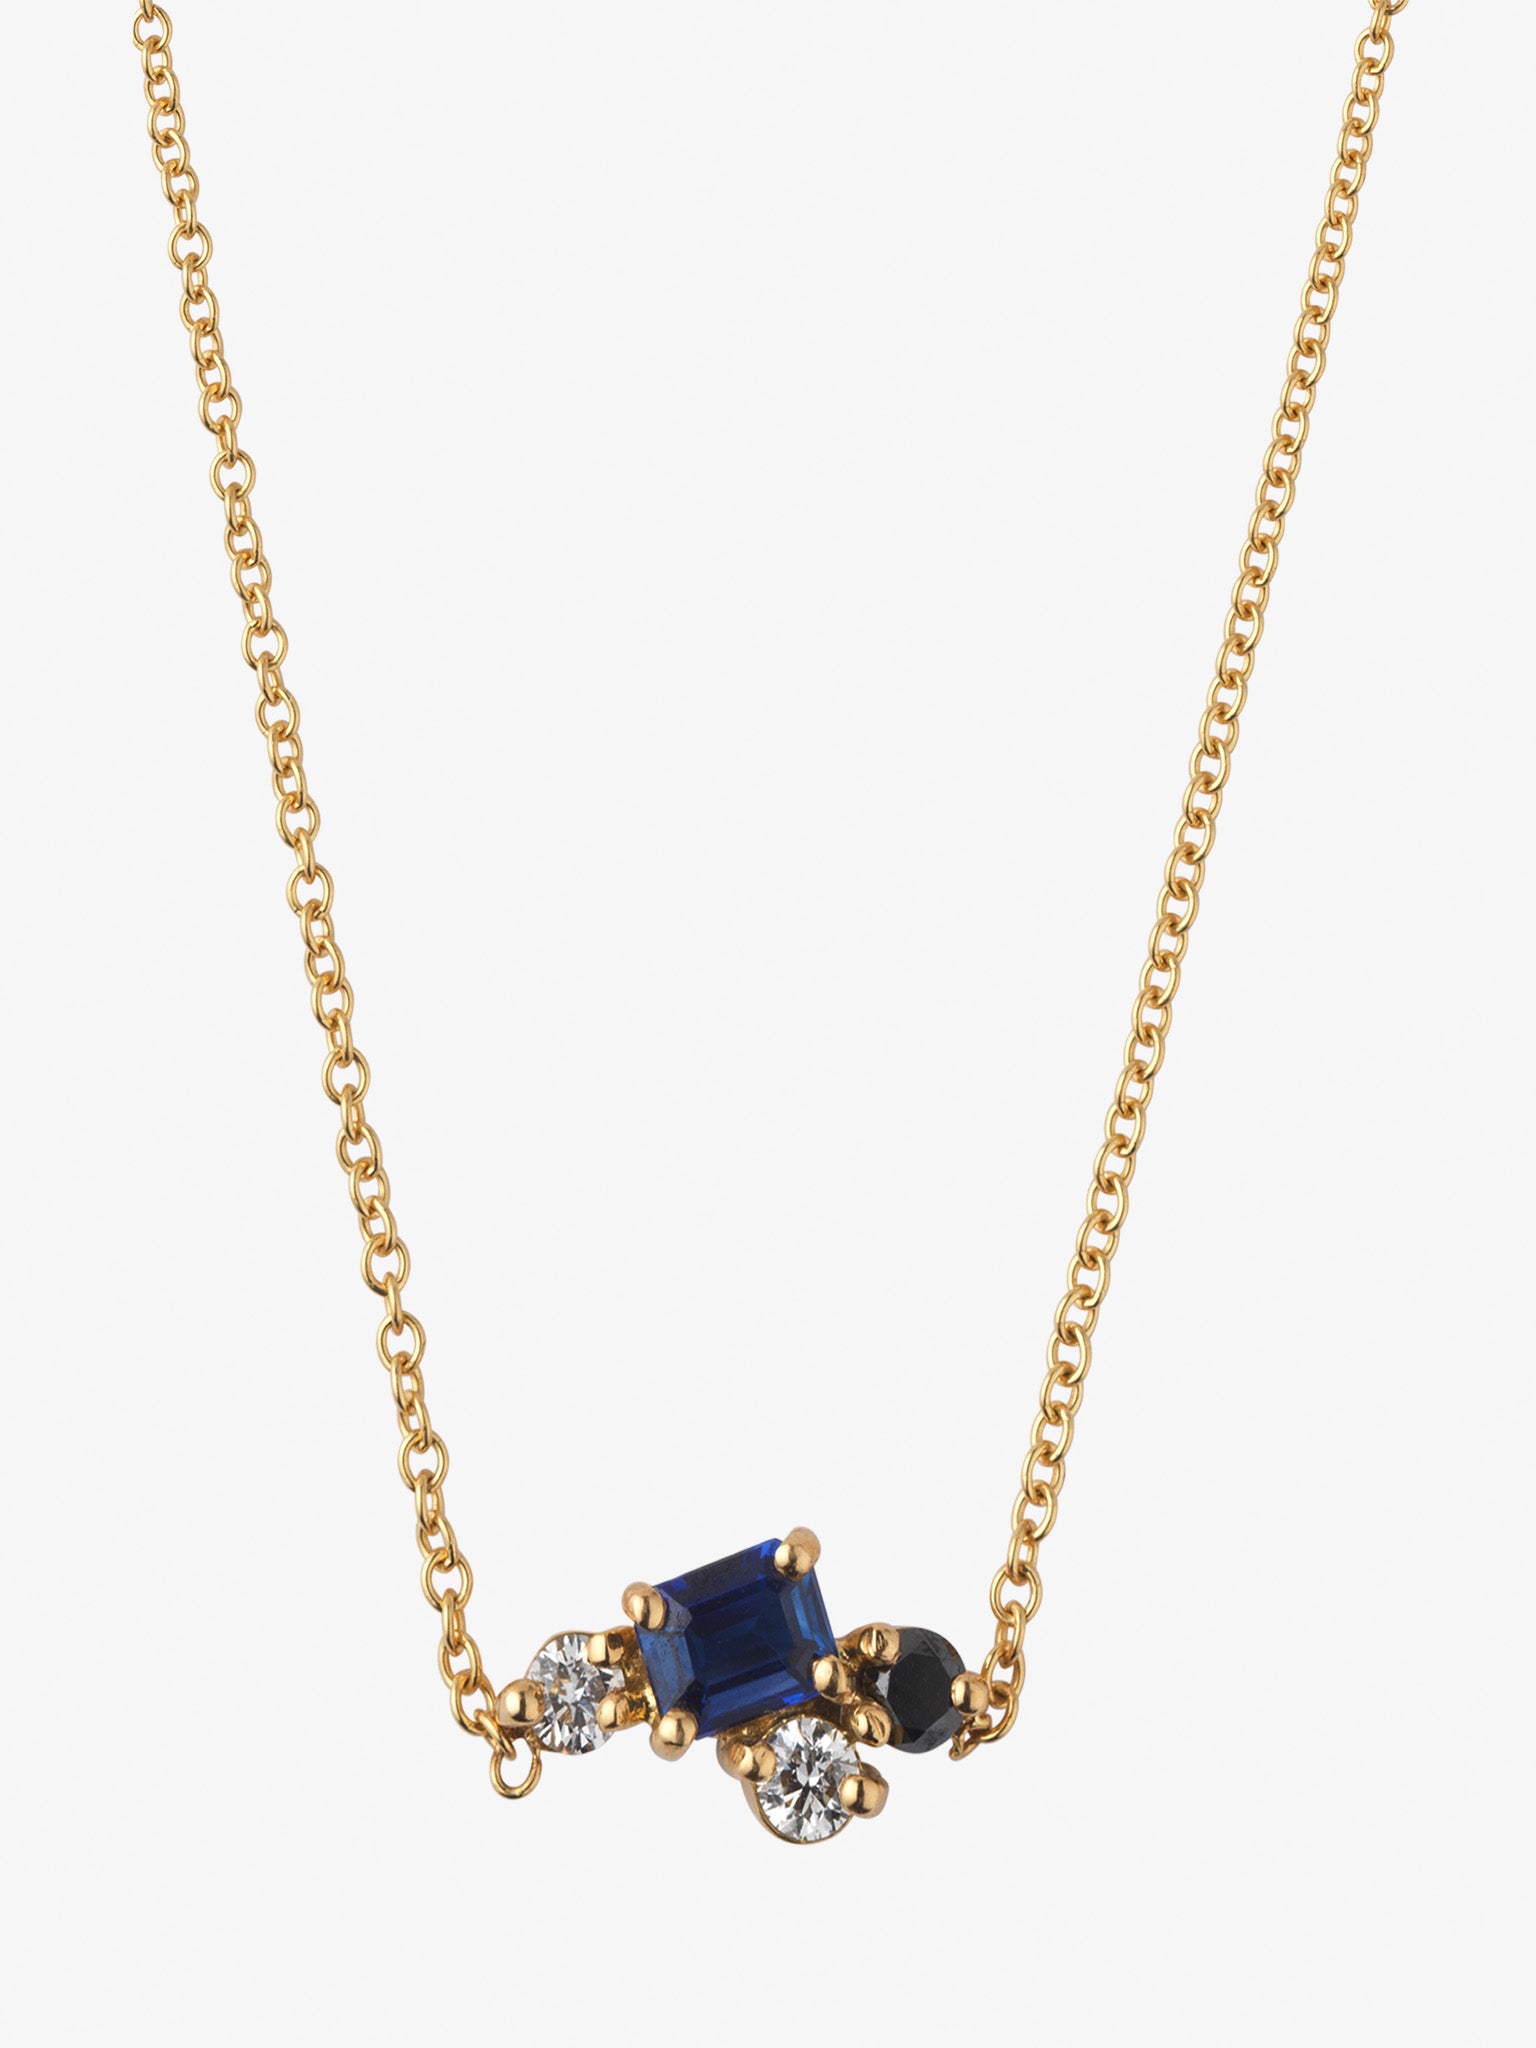 Sapphire cosmic dawn necklace